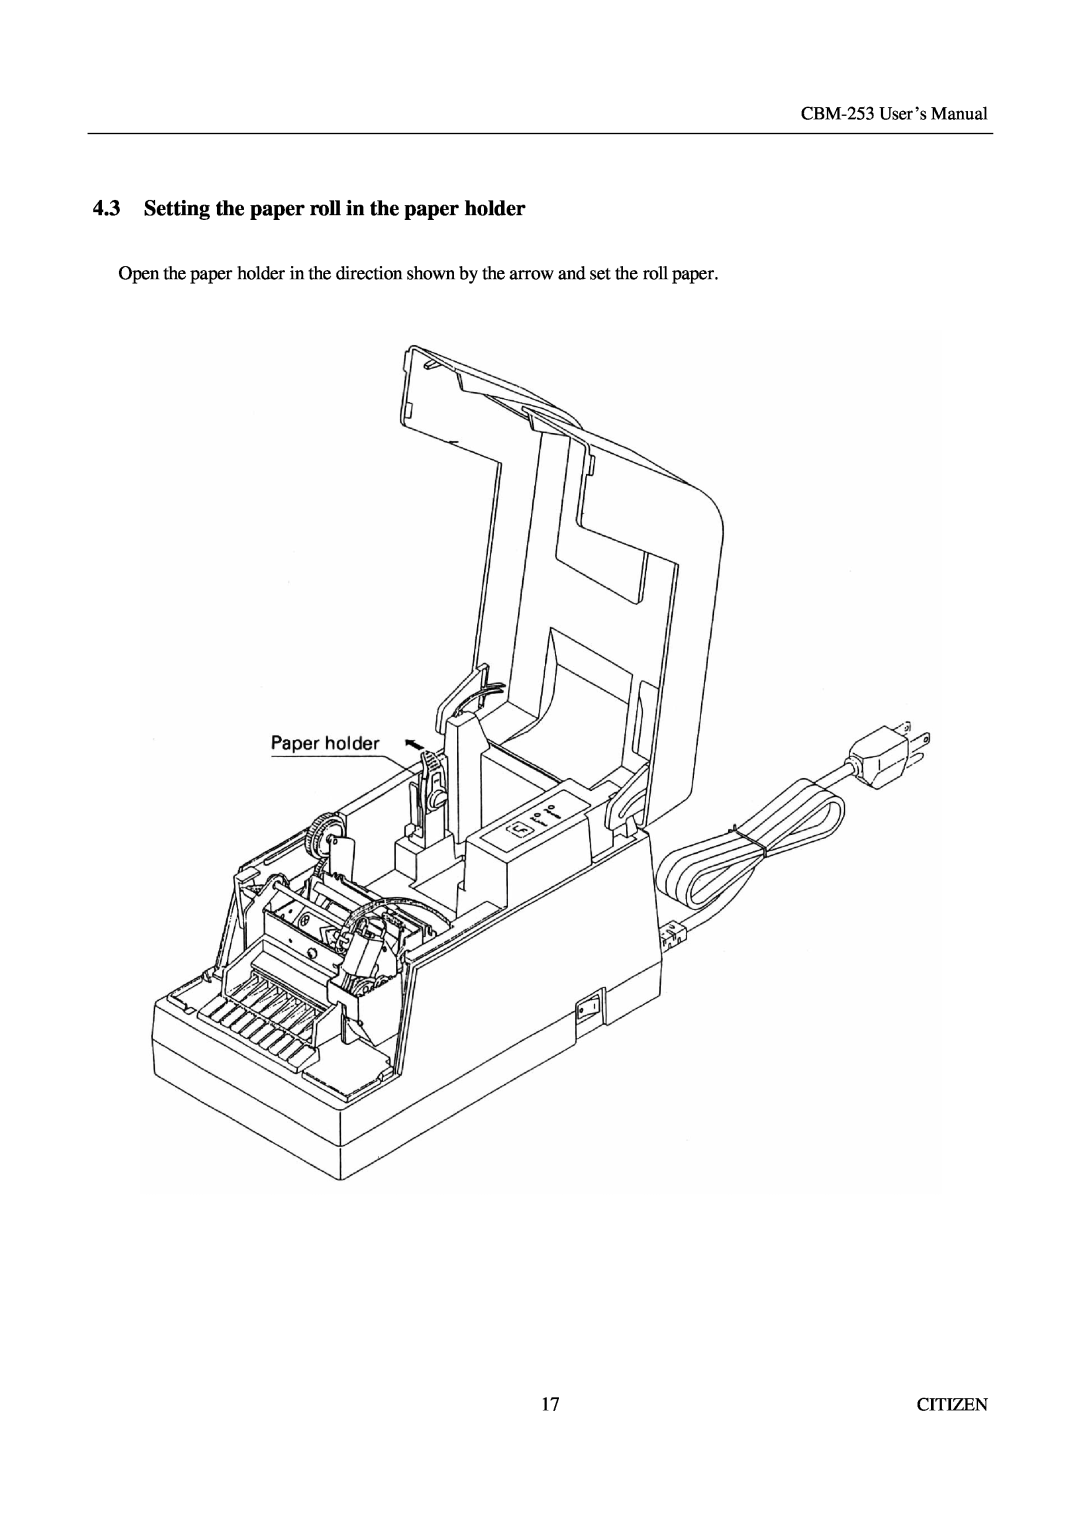 Citizen Systems manual Setting the paper roll in the paper holder, CBM-253 User’s Manual, Citizen 